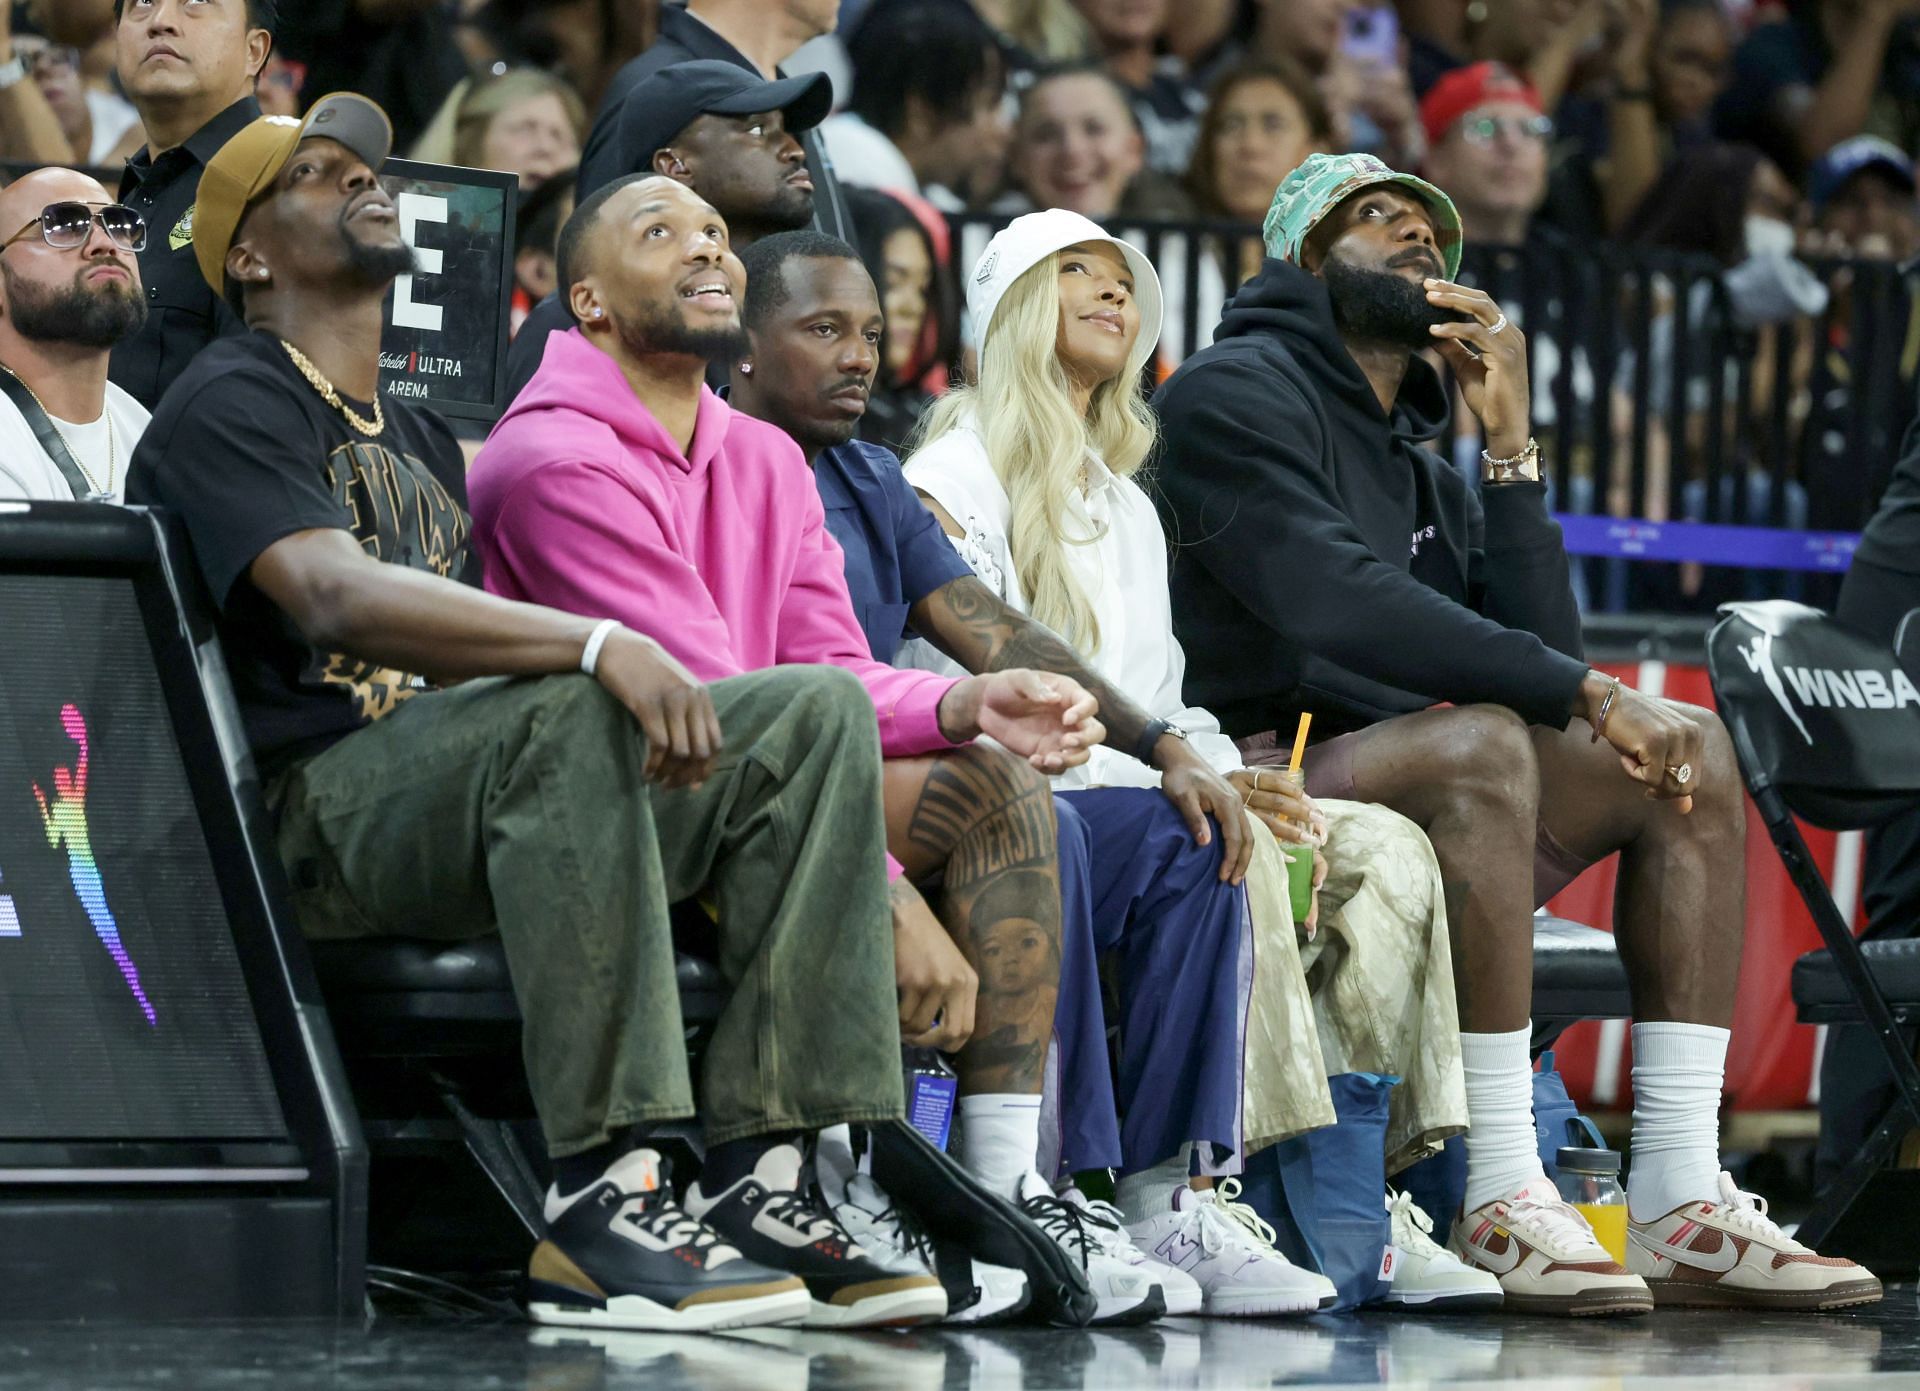 Crown her Ayeee!" - LeBron James calls wife Savannah 'best friend' with  touching caption as NBA power couple attends WNBA game